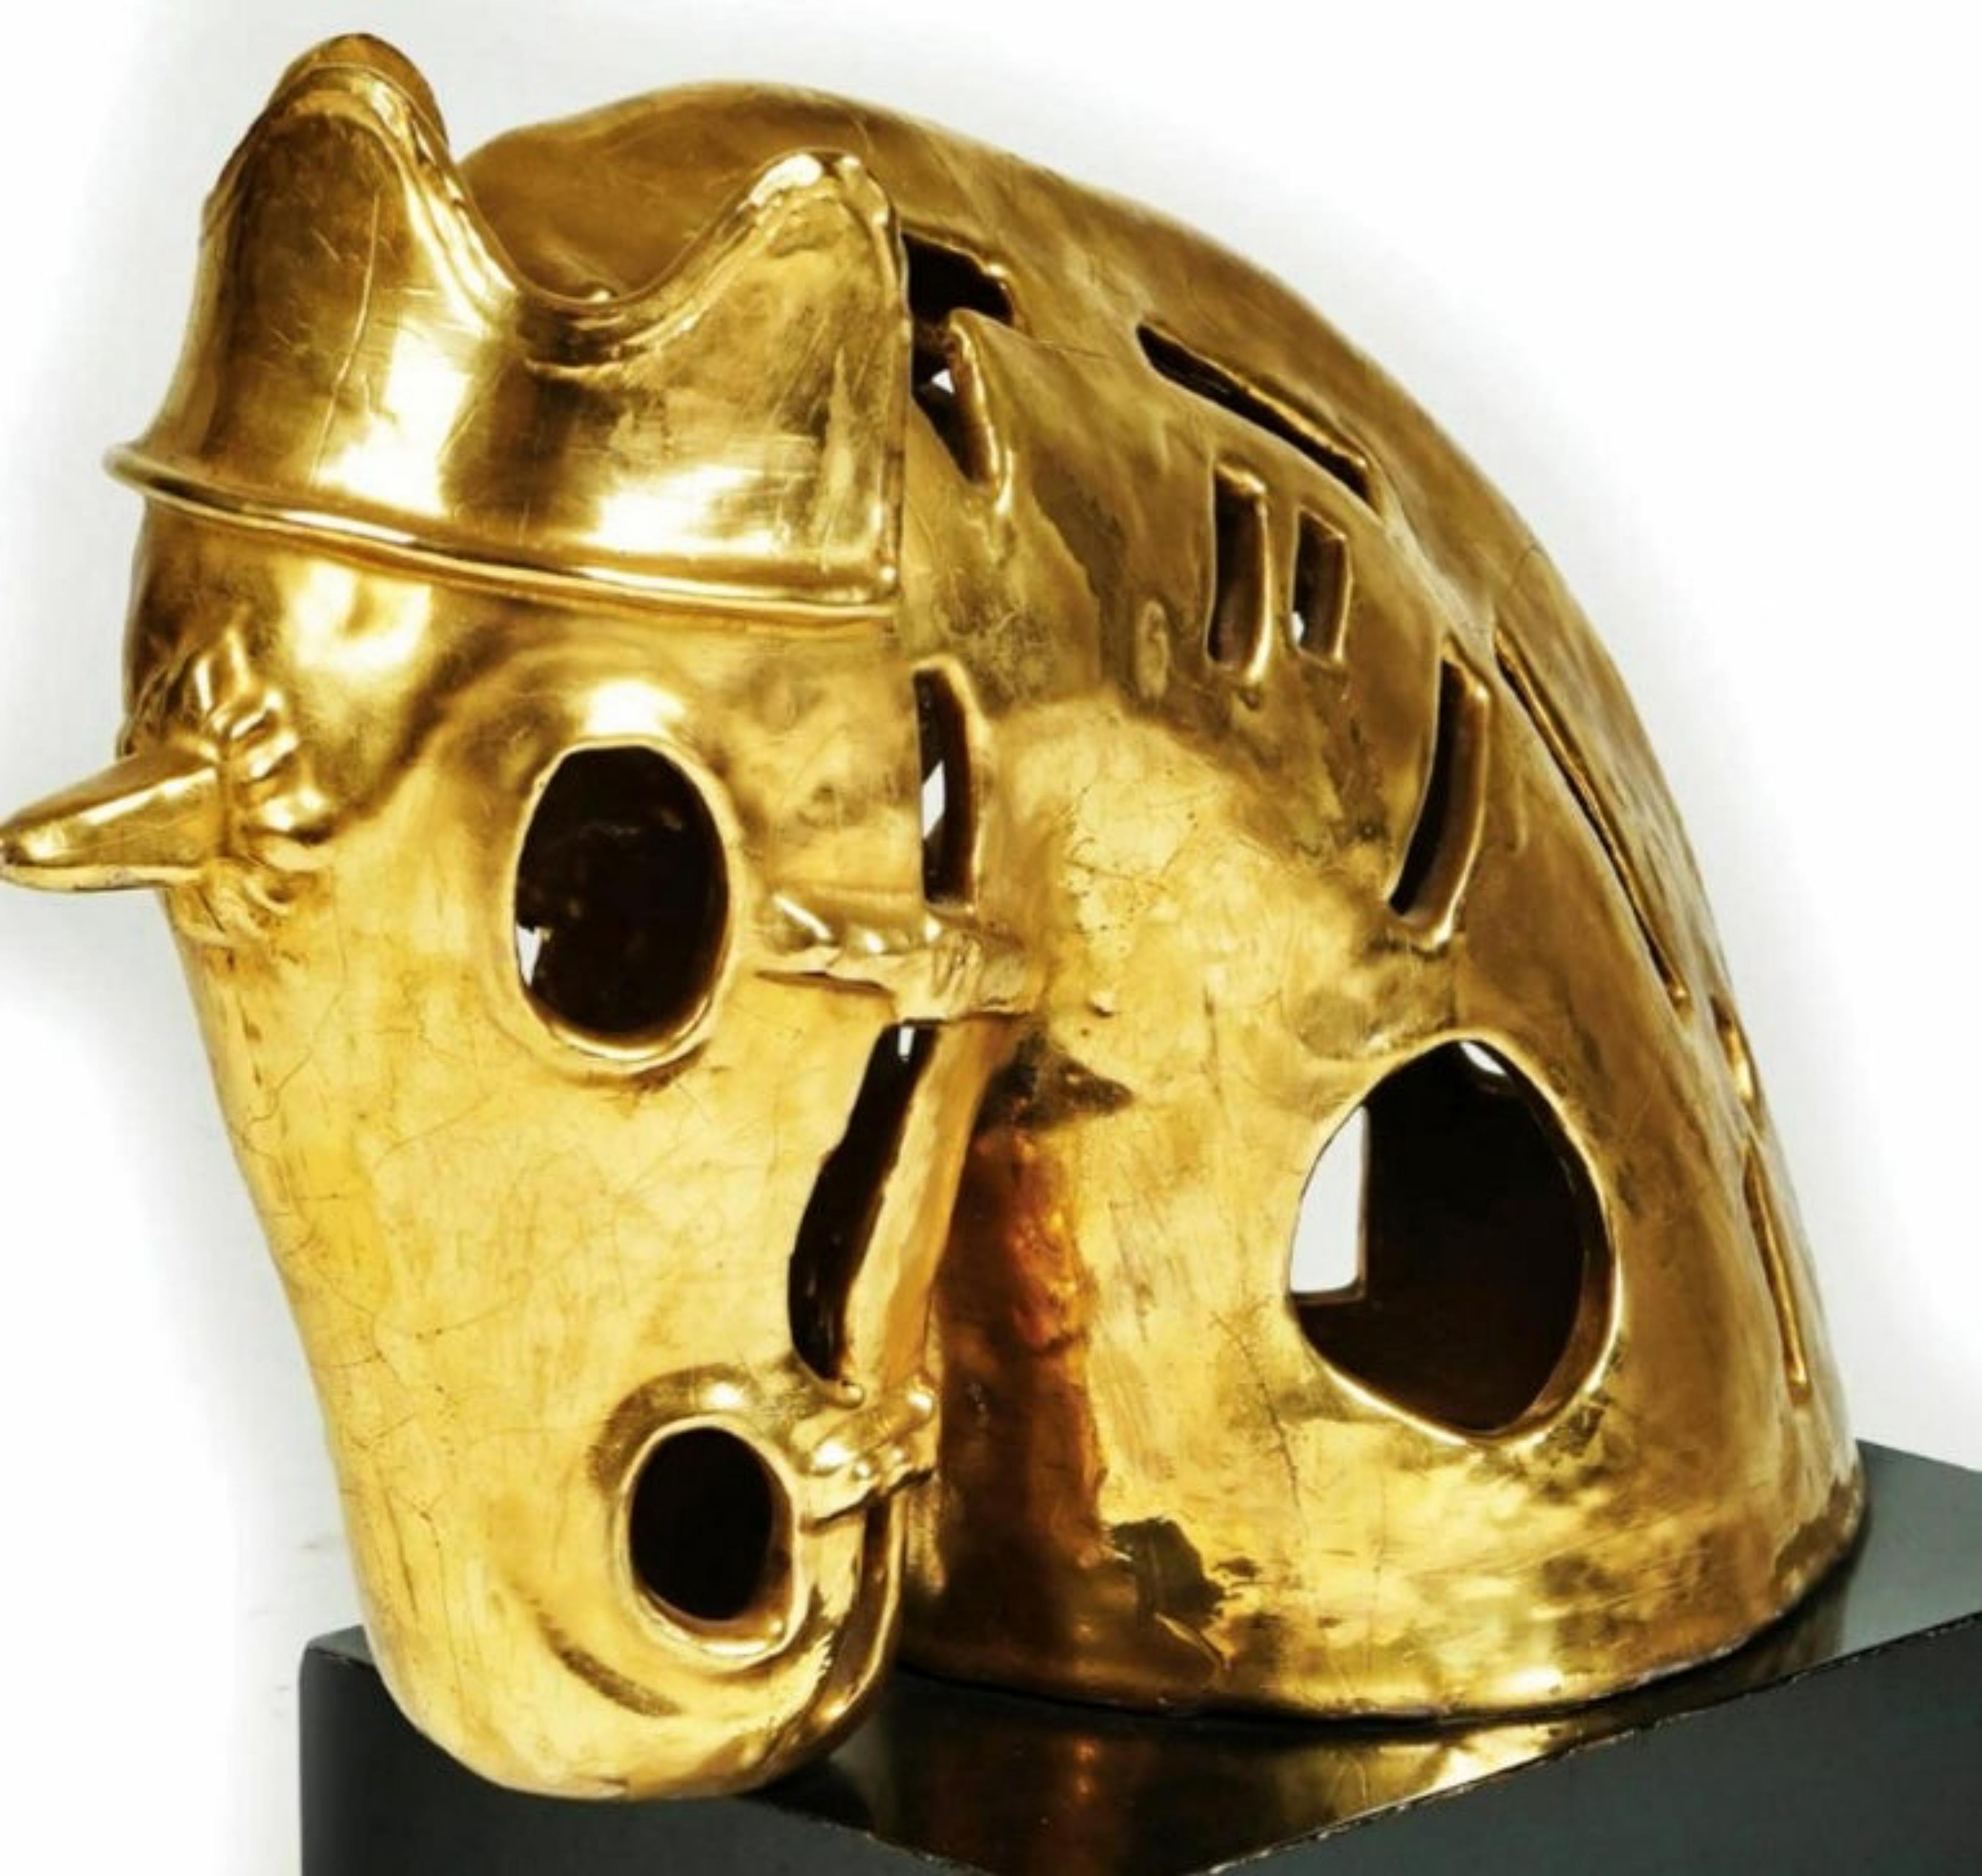 Modern Italian Horse Head Sculpture in Golden Ceramic Early 20th Century For Sale